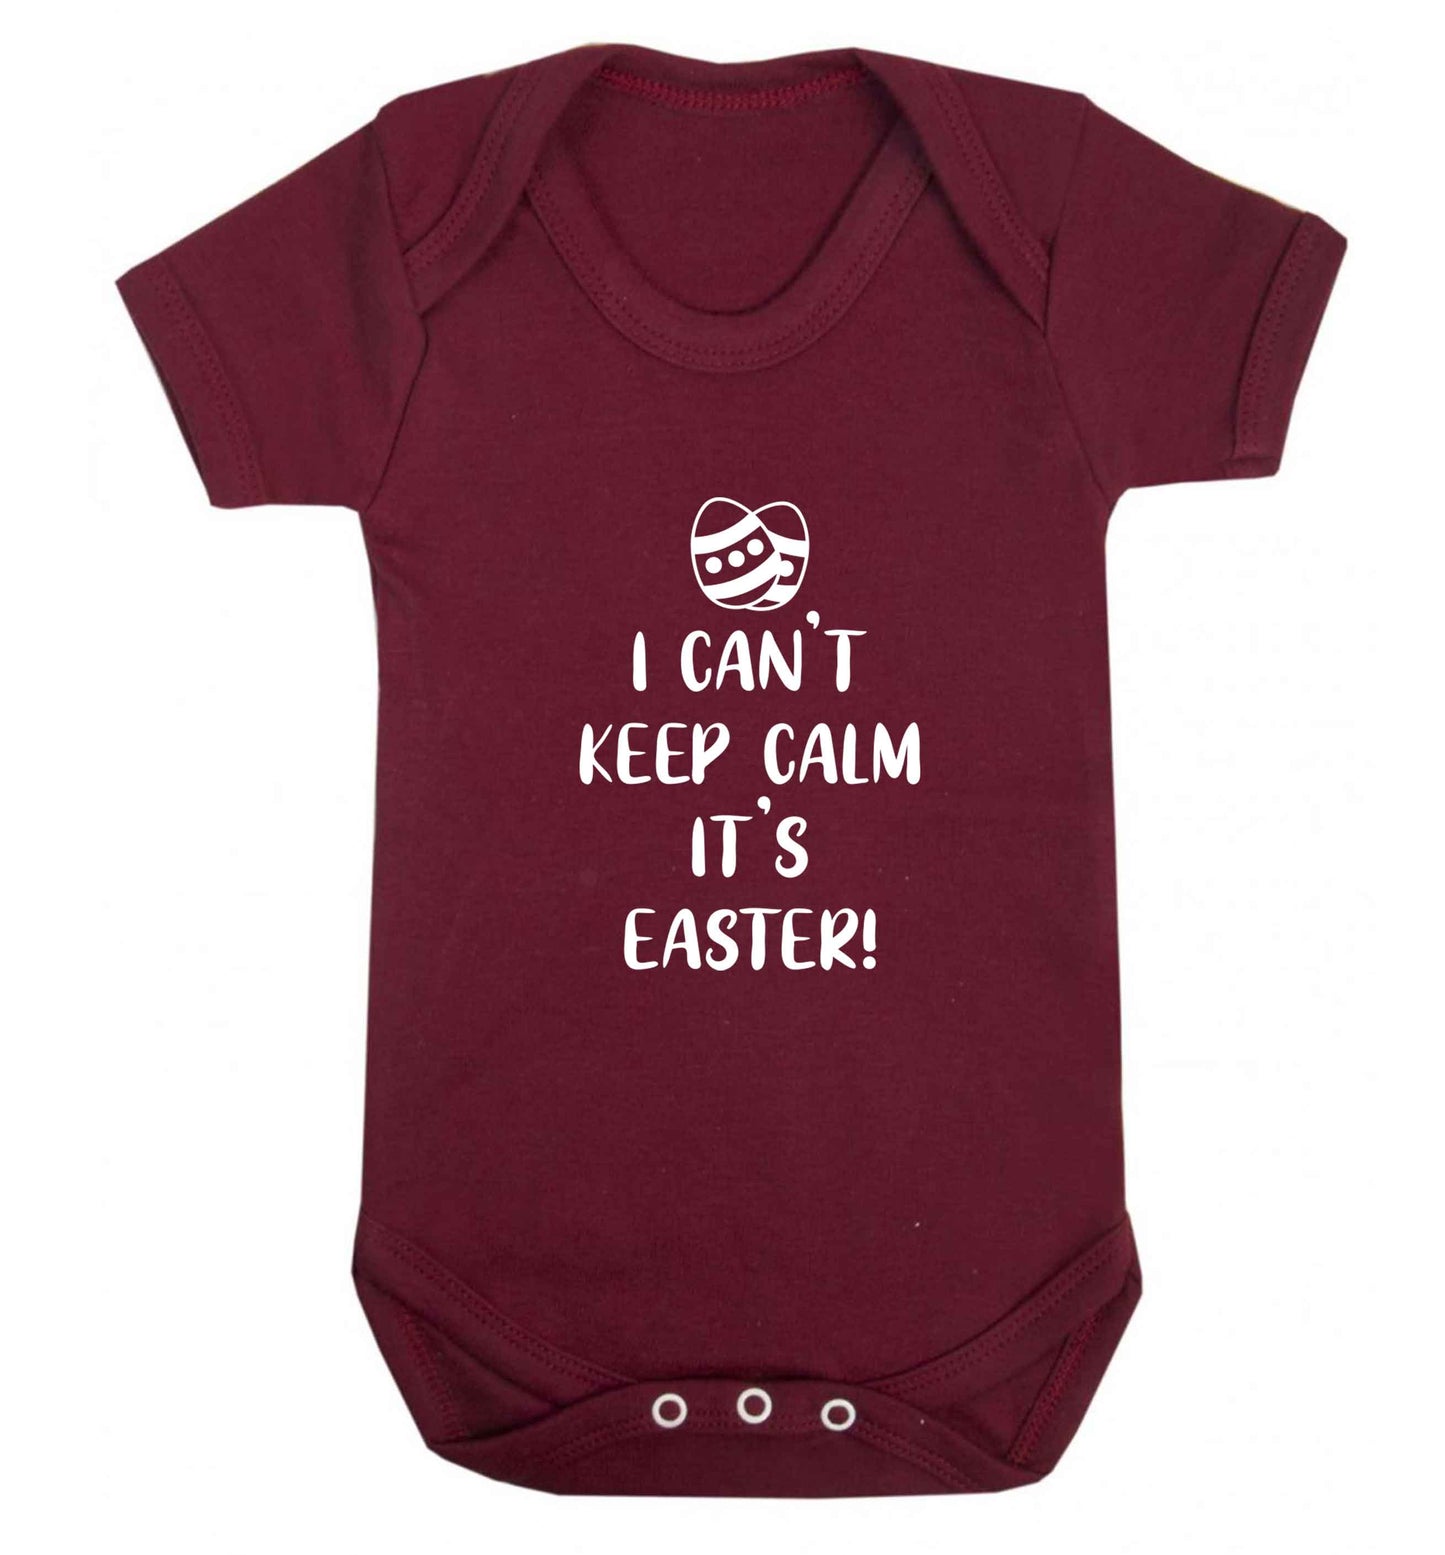 I can't keep calm it's Easter baby vest maroon 18-24 months